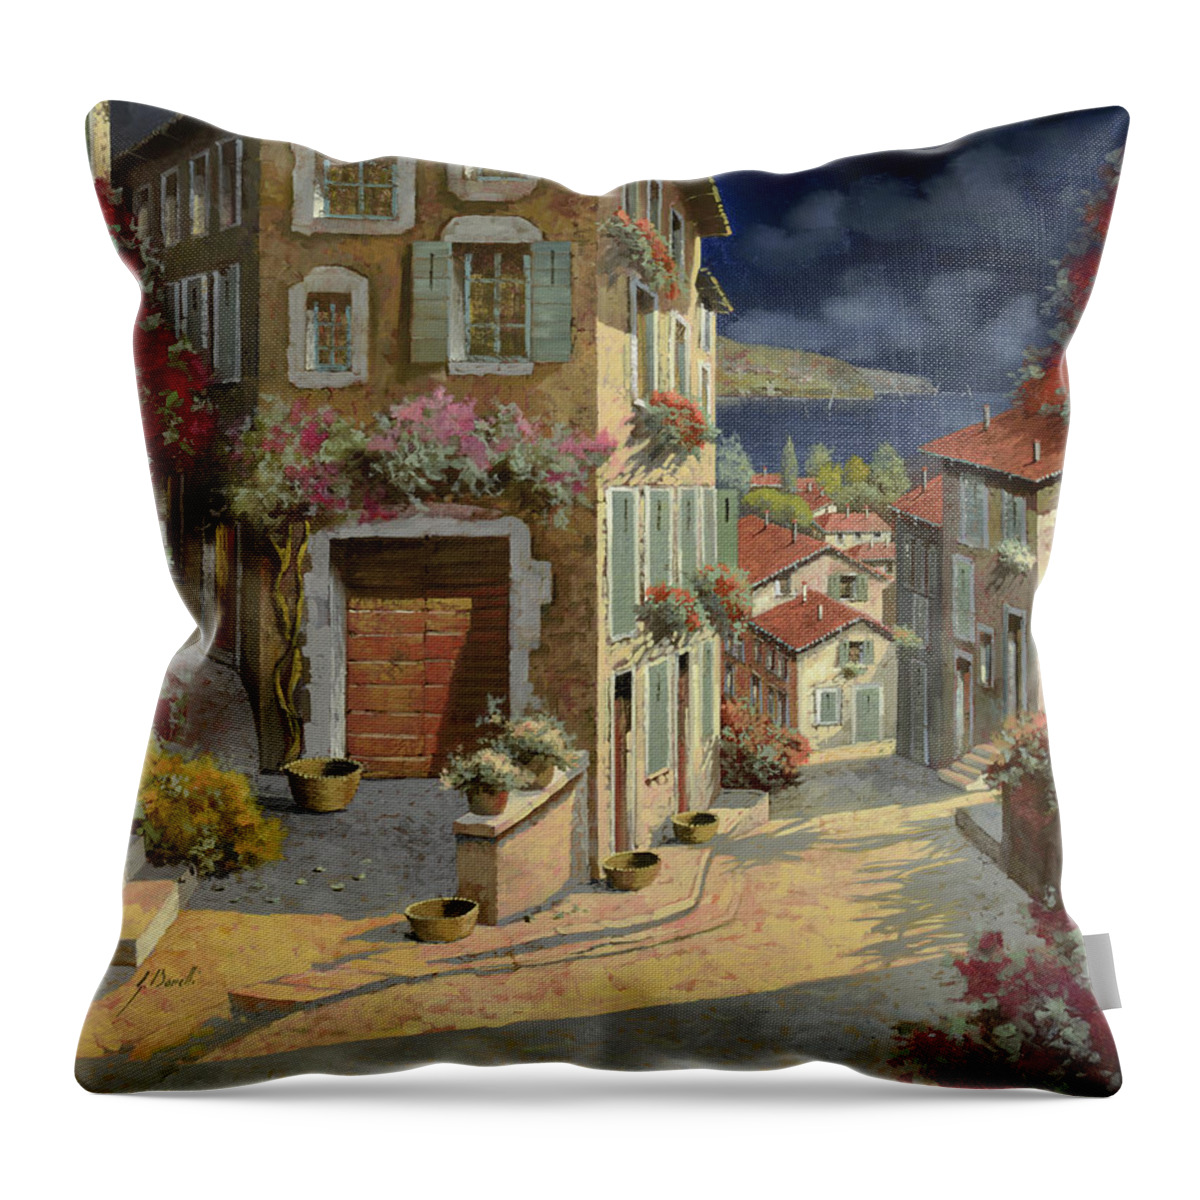 Seascape Throw Pillow featuring the painting Di Notte Al Mare by Guido Borelli